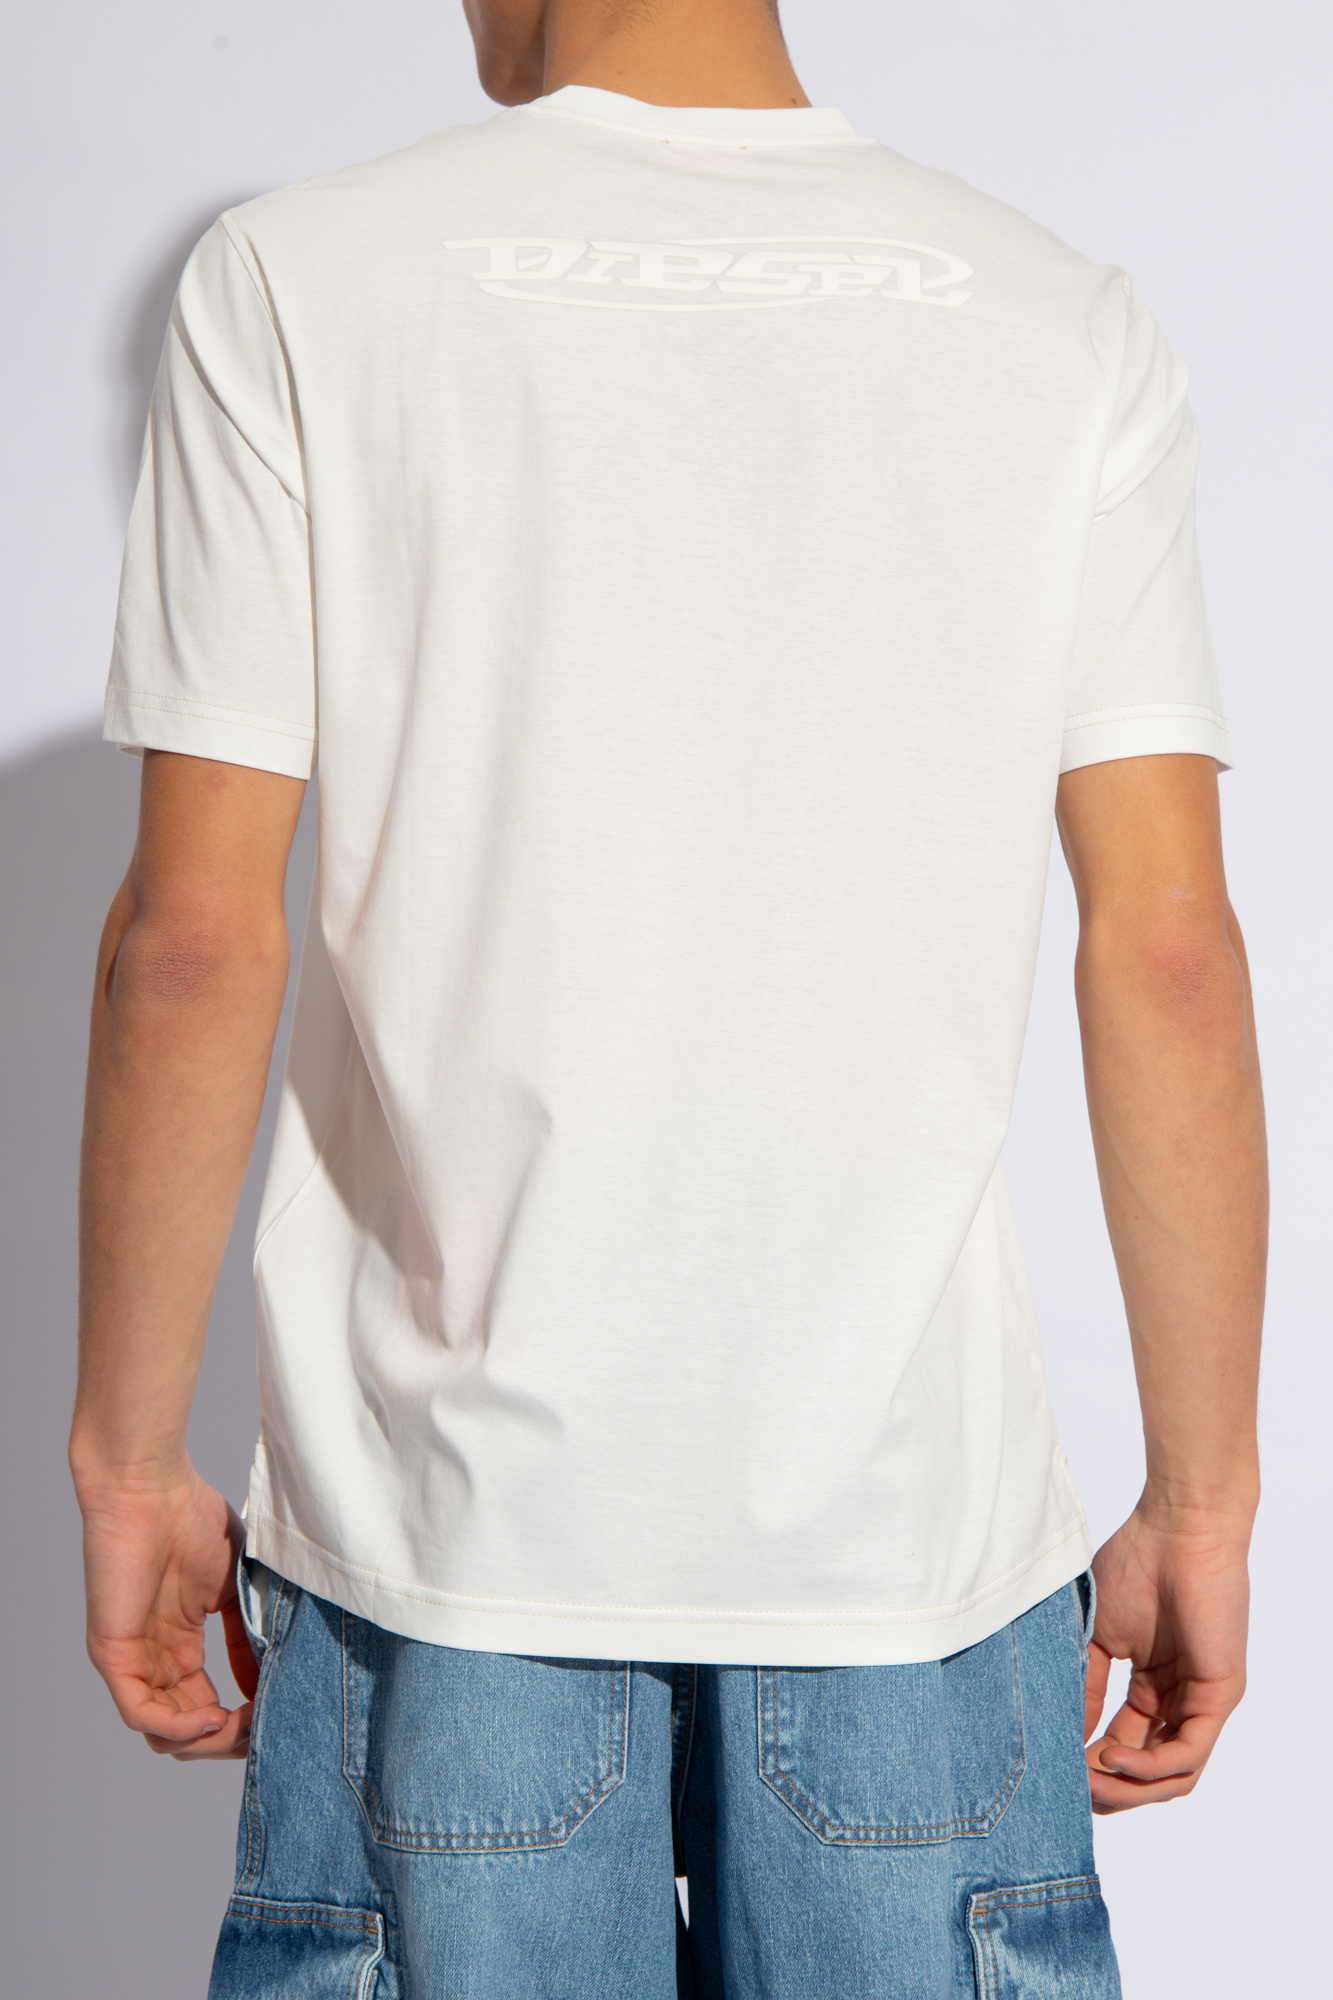 Diesel ‘T-MUST’ T-shirt with logo